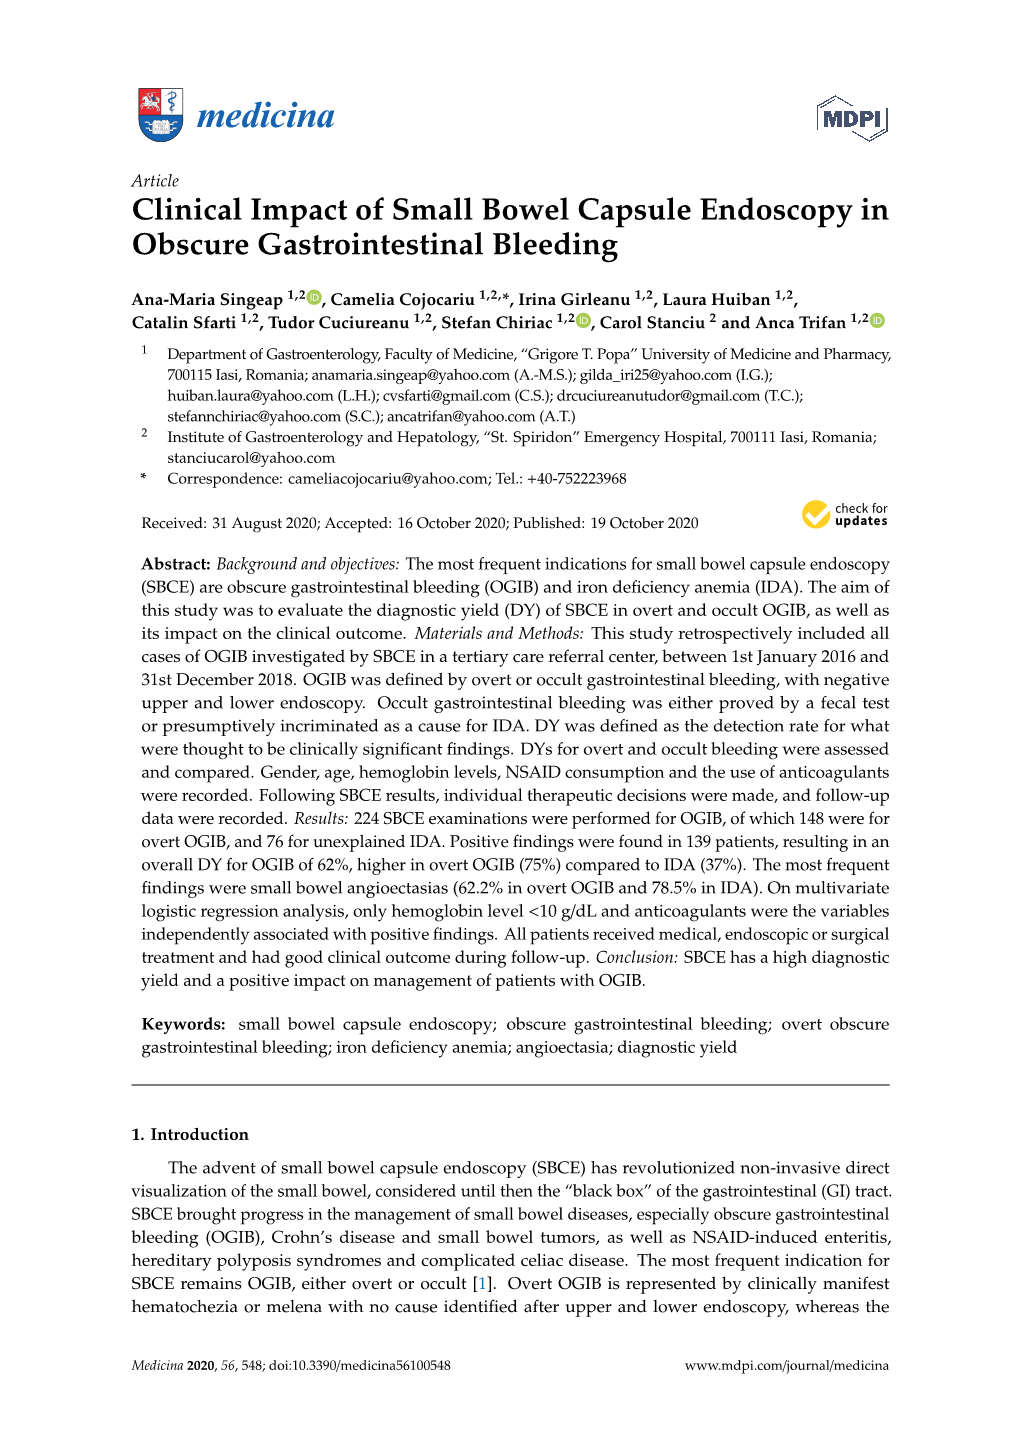 Clinical Impact of Small Bowel Capsule Endoscopy in Obscure Gastrointestinal Bleeding